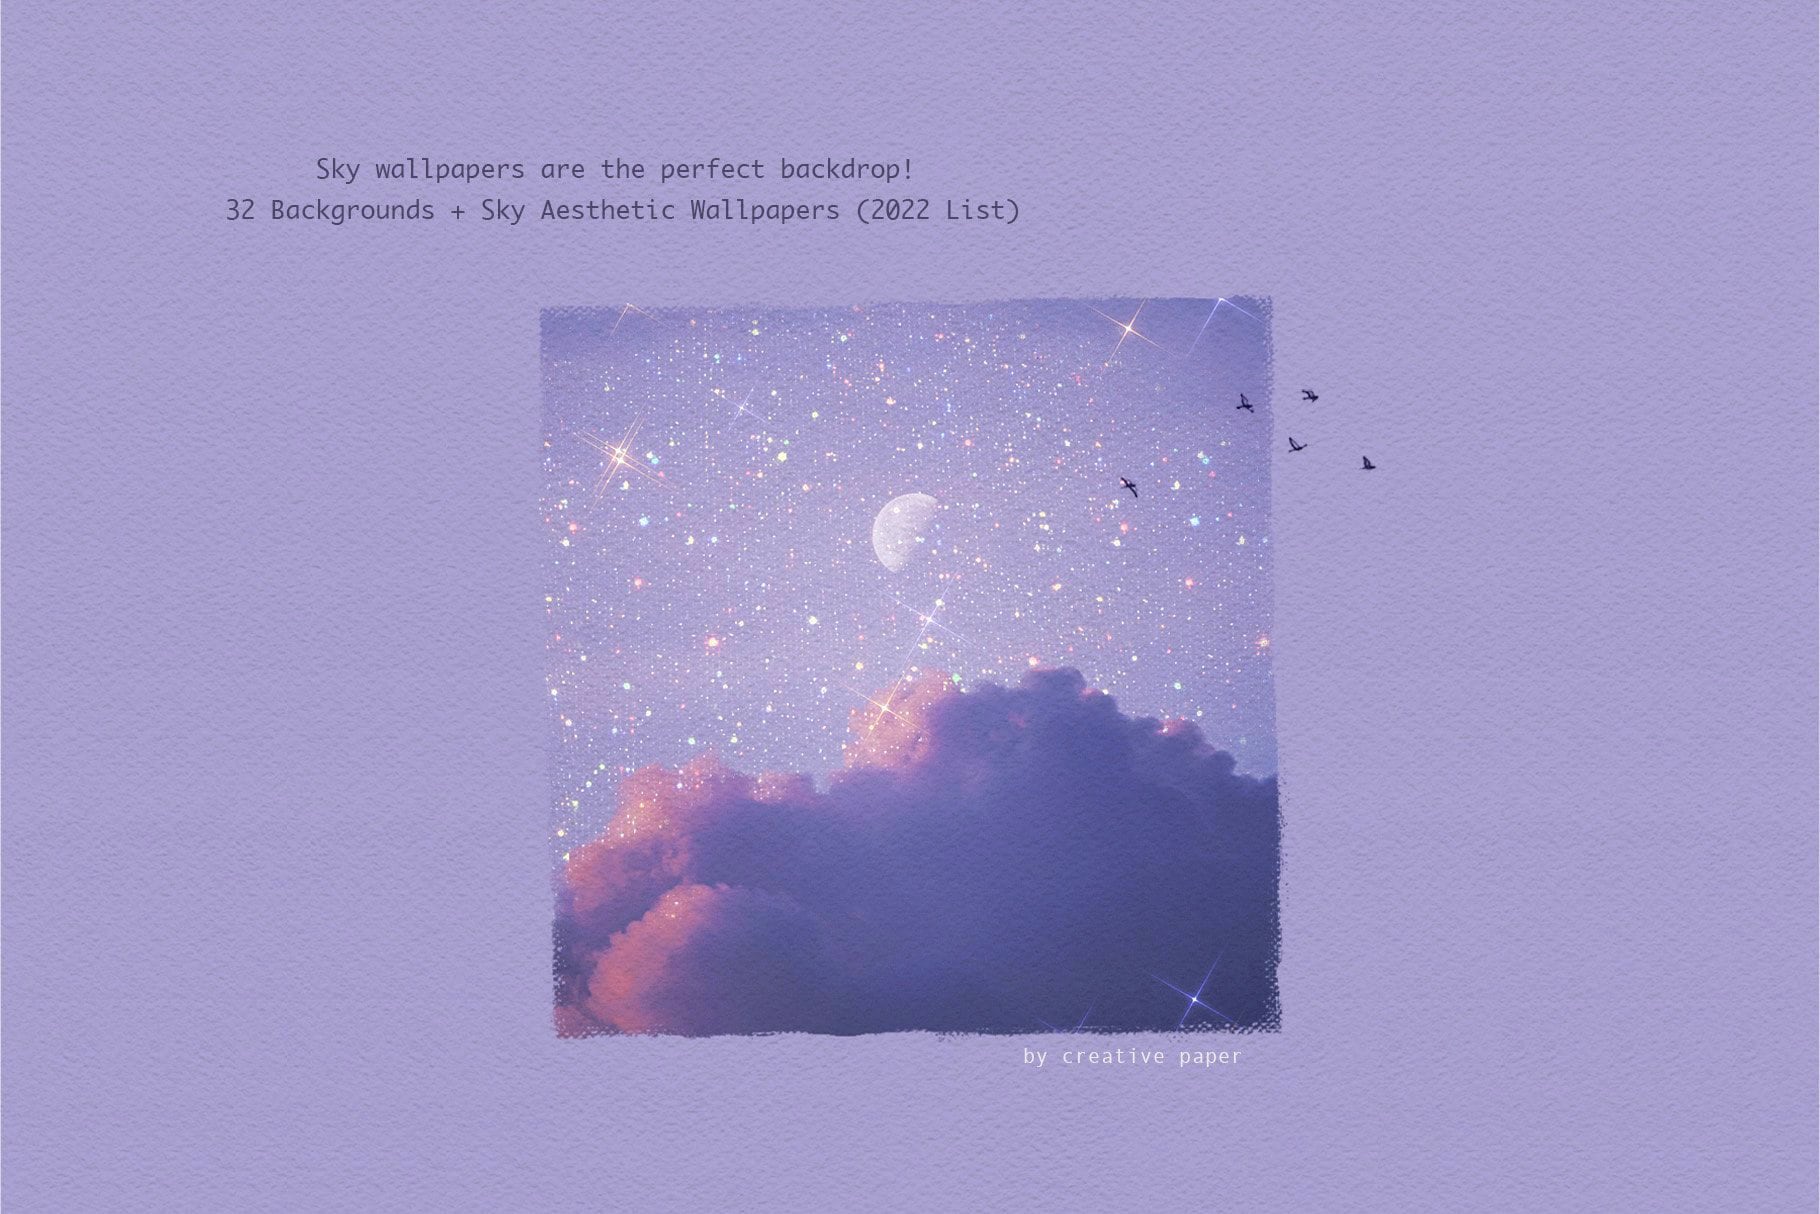 Aesthetic sky wallpaper with a crescent moon, stars, and birds flying in the night sky. - Constellation, sky